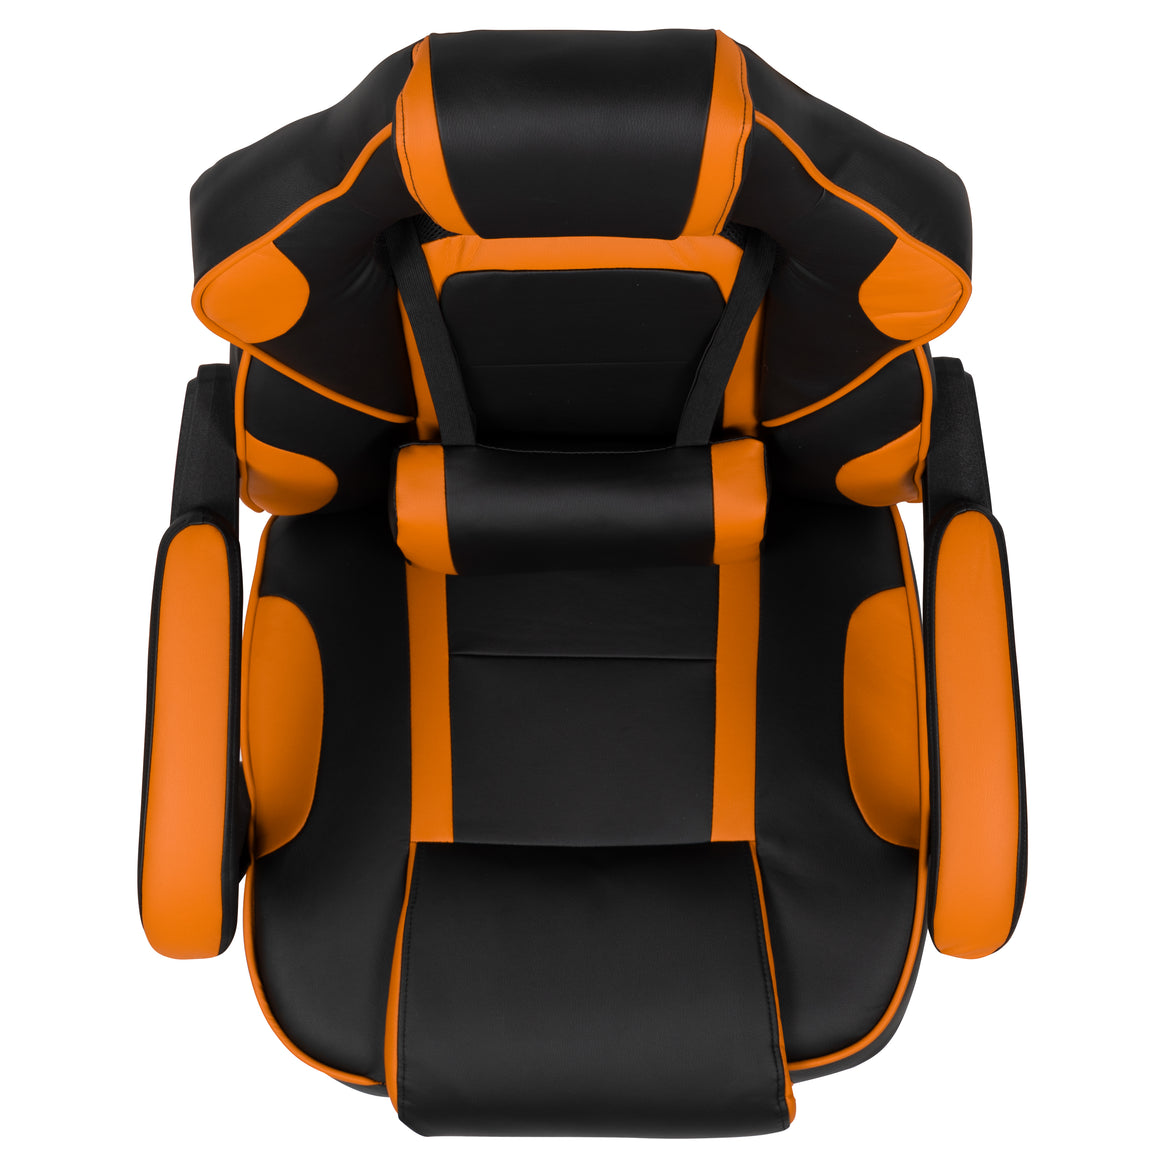 Gaming Racing Ergonomic Computer Chair with Massage - Orange - Man Cave Boutique